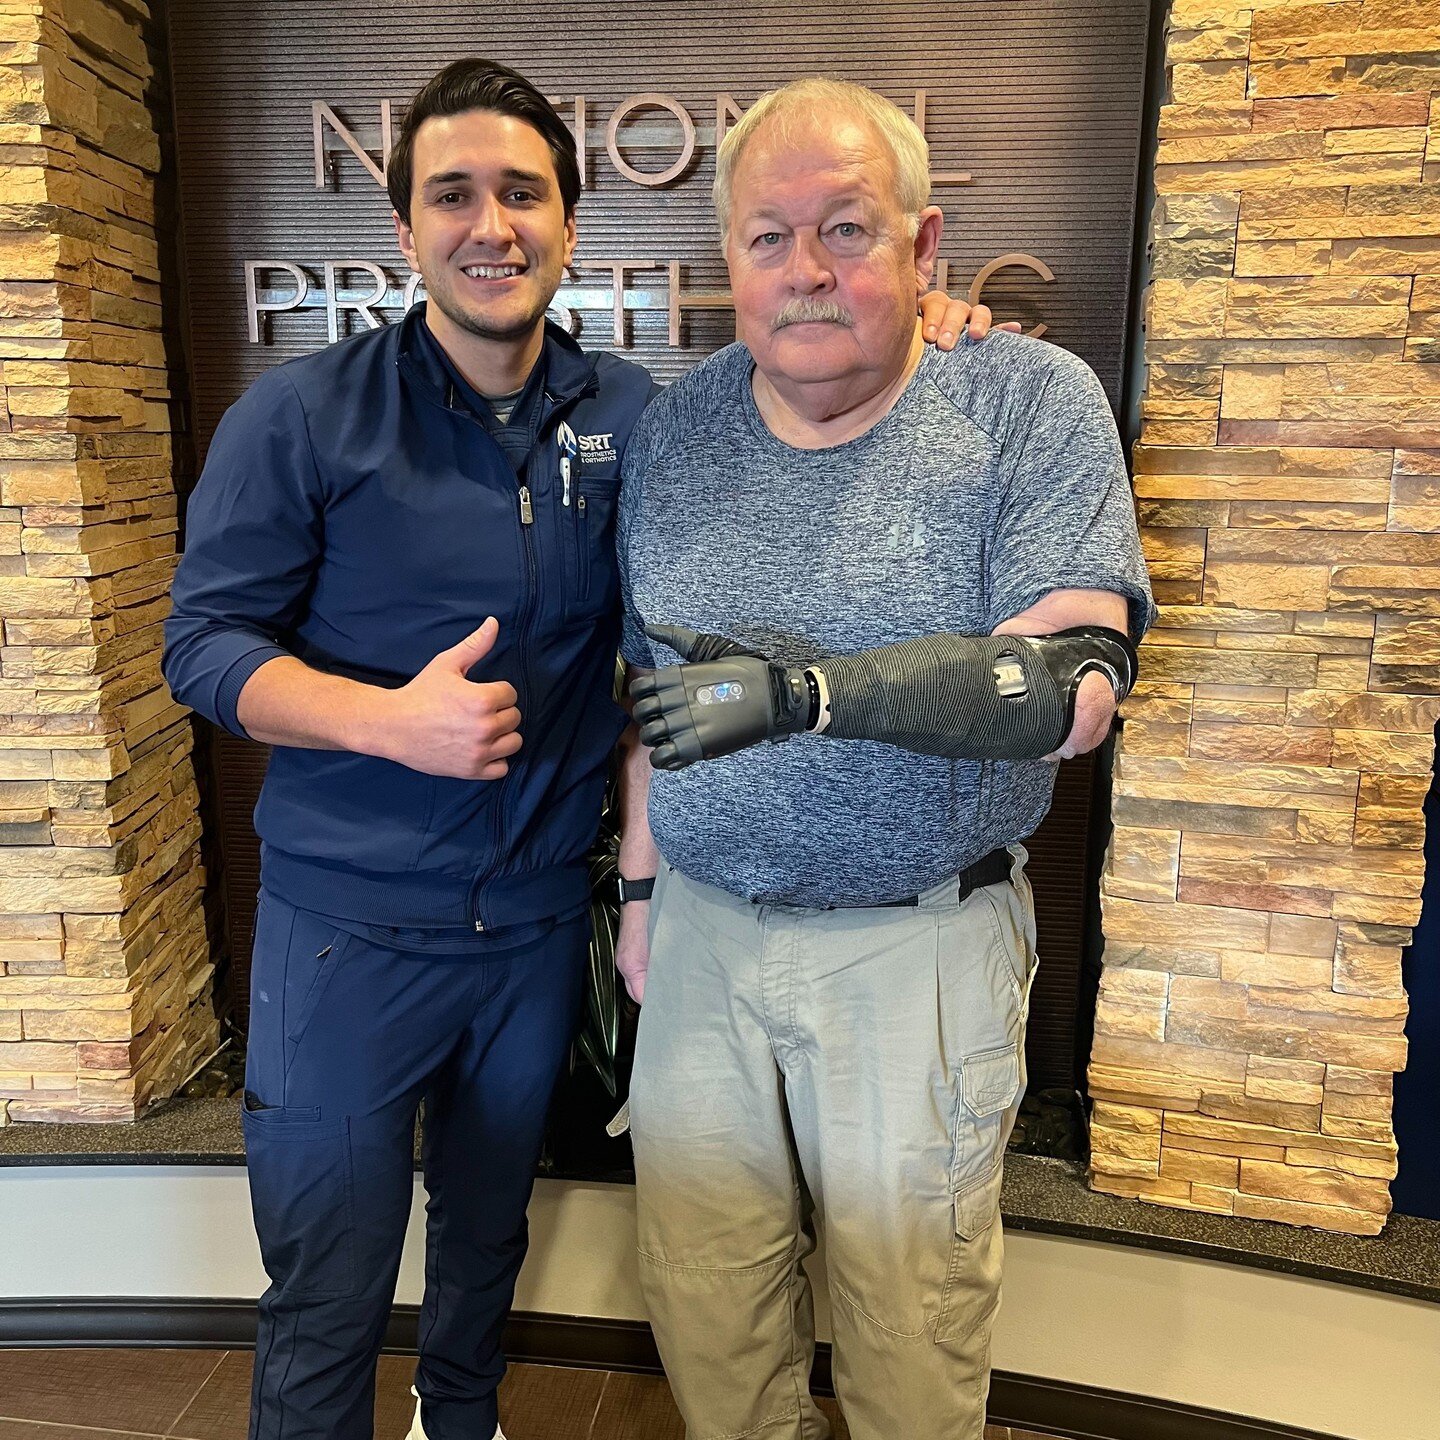 Andrew, a prosthetic resident at SRT, successfully delivered his first solo transradial myoelectric device. Vern, a valued patient of SRT for a long time, enthusiastically endorsed the device with a thumbs-up using the TASKA hand! 👍